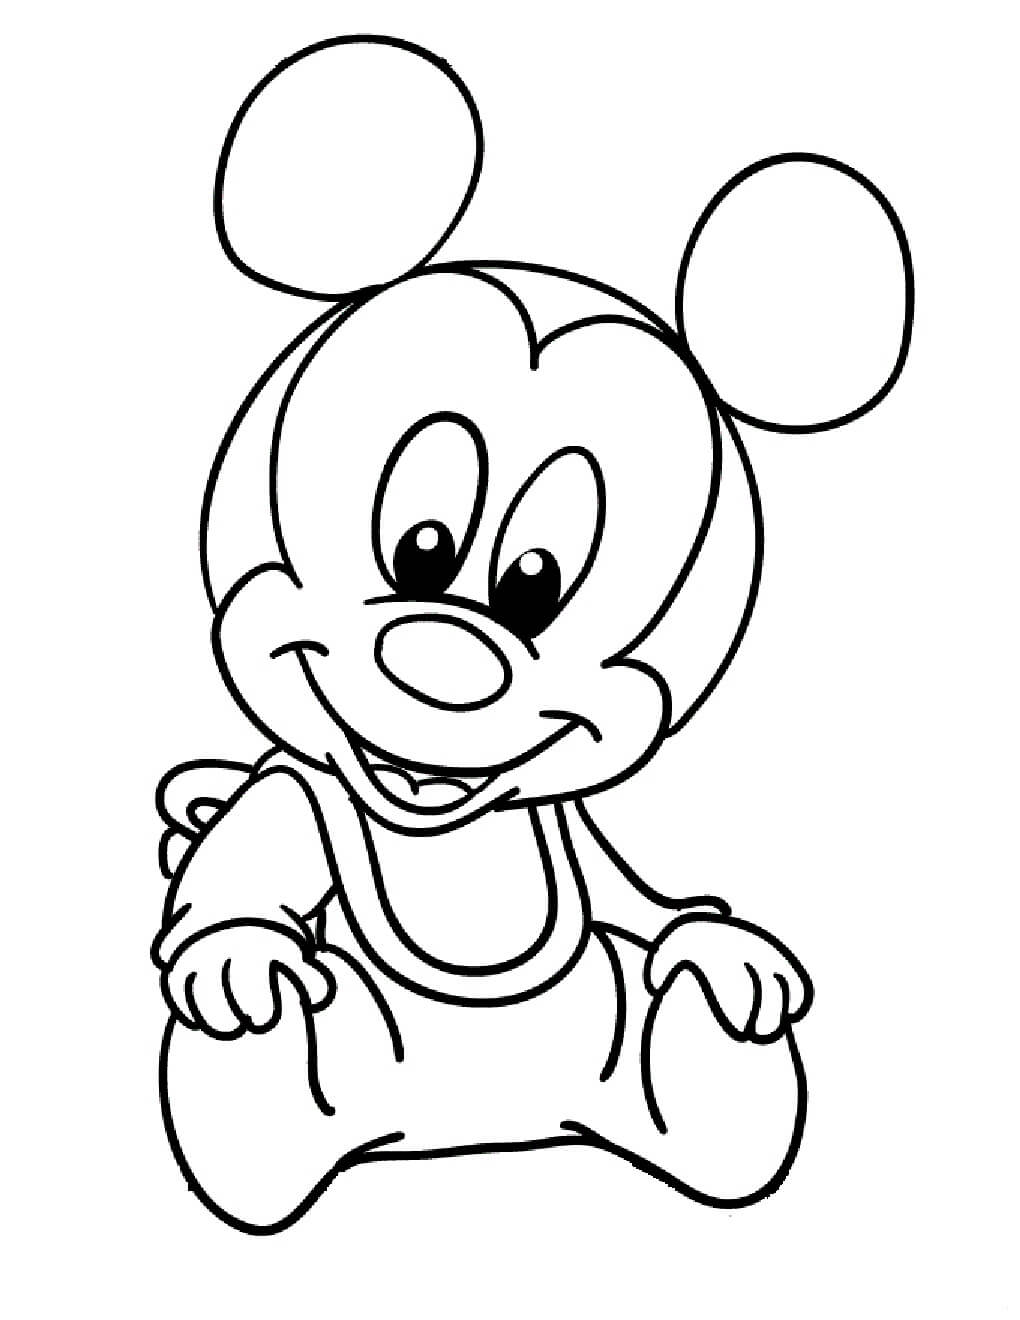 Grappige baby Mickey Mouse zitten